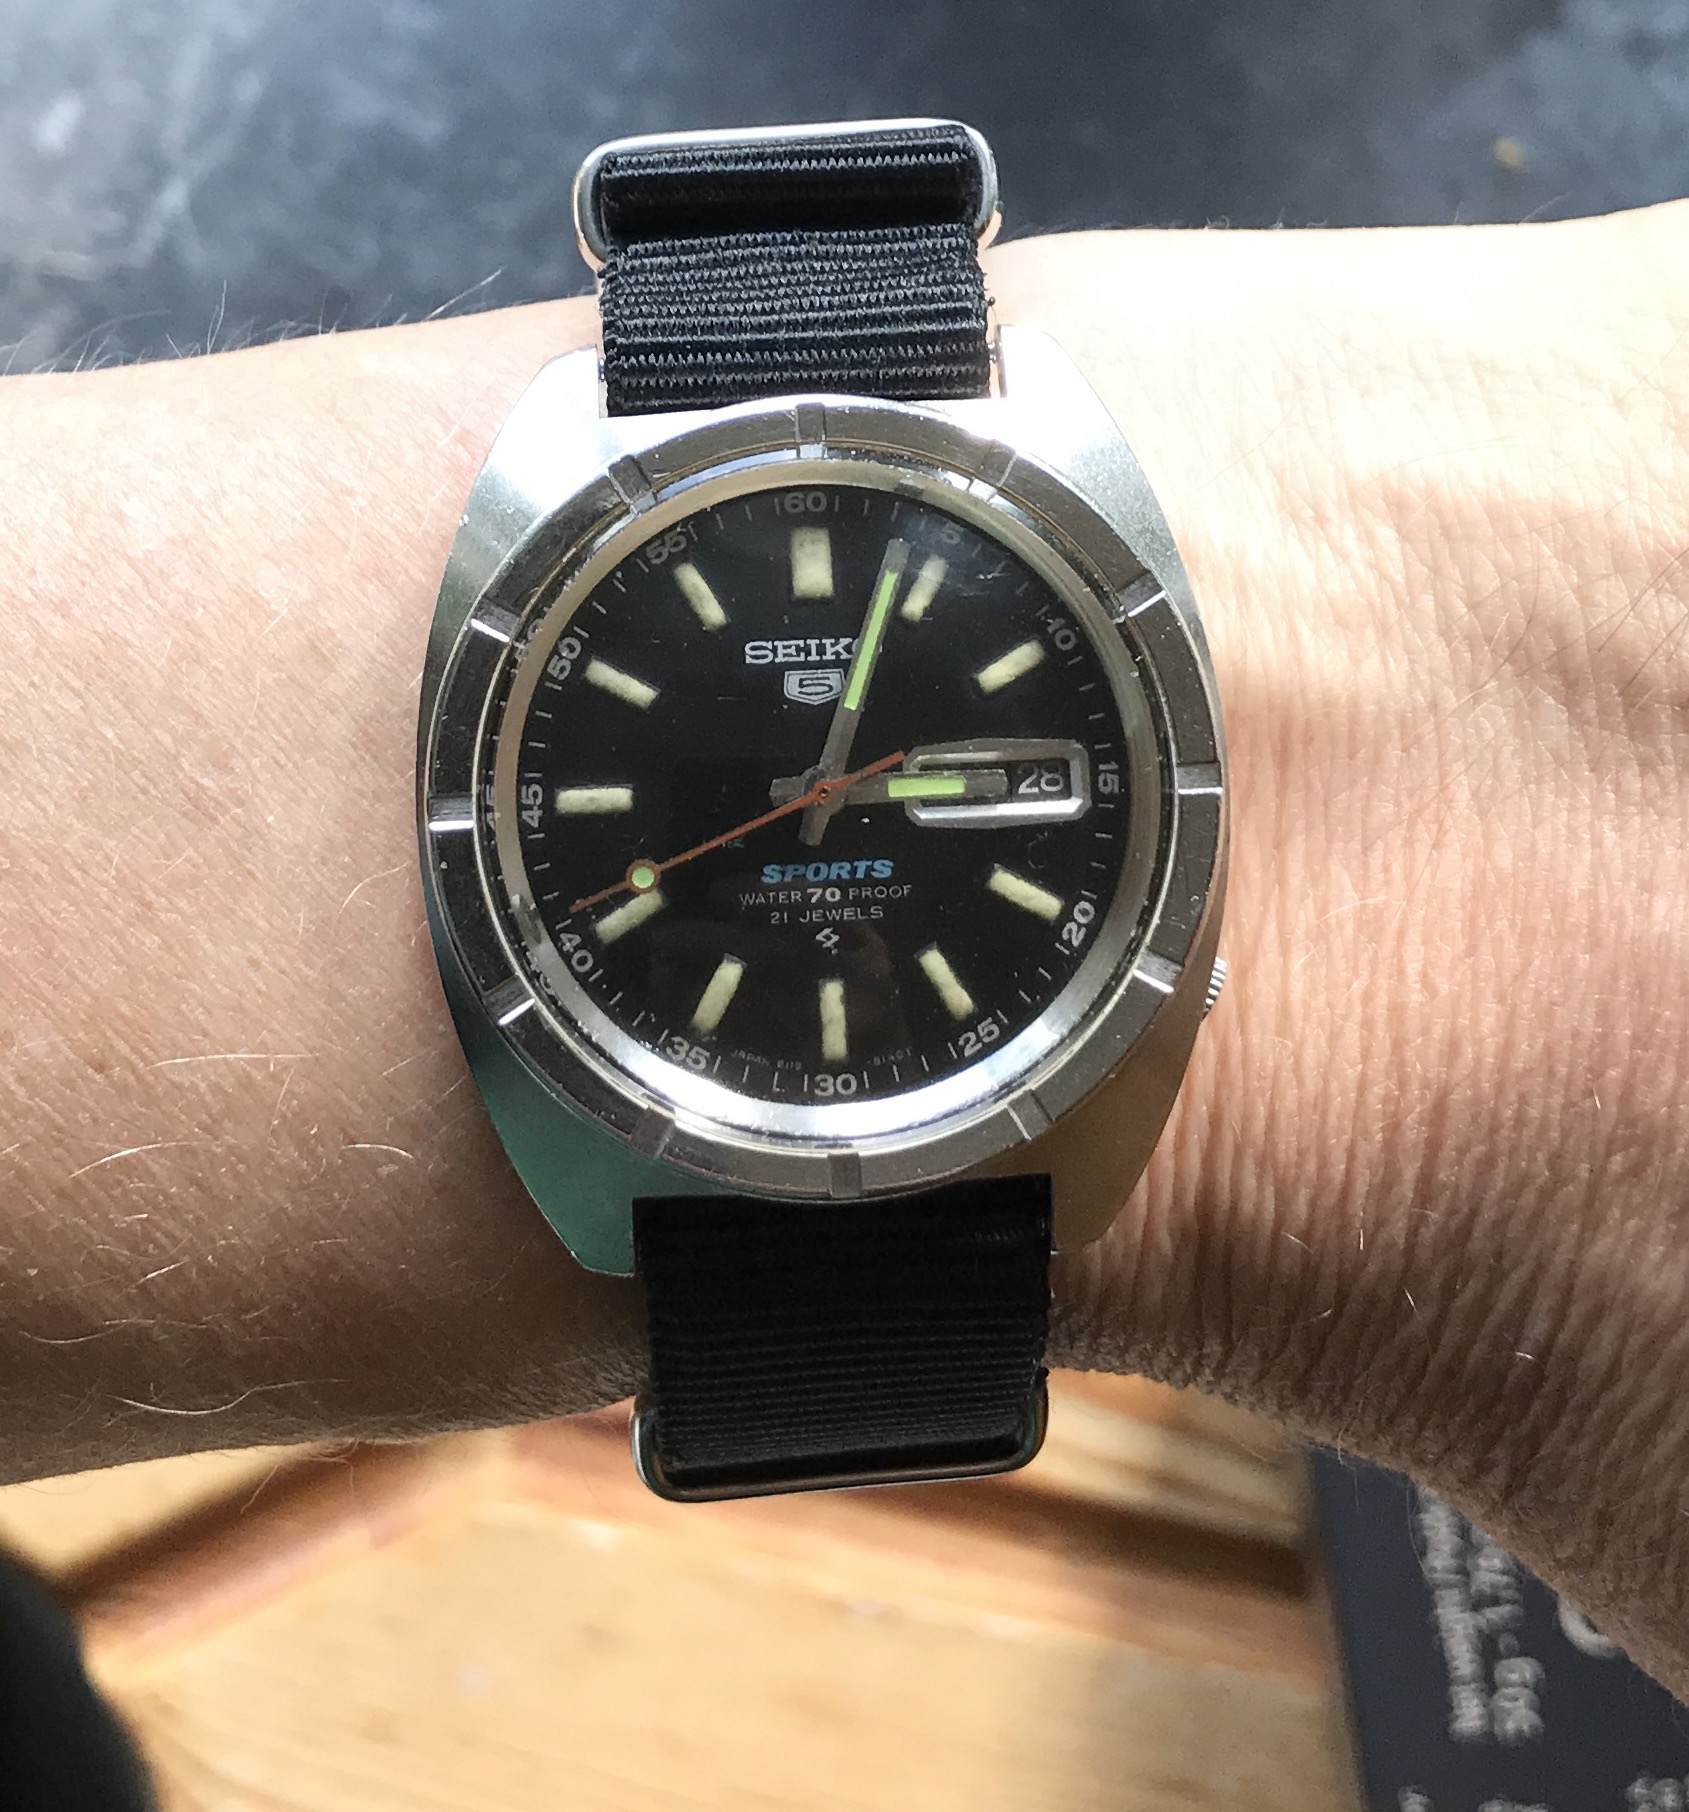 SOLD - 1968 Seiko 5 Sports Diver 6119 8140 £100 | Omega Forums